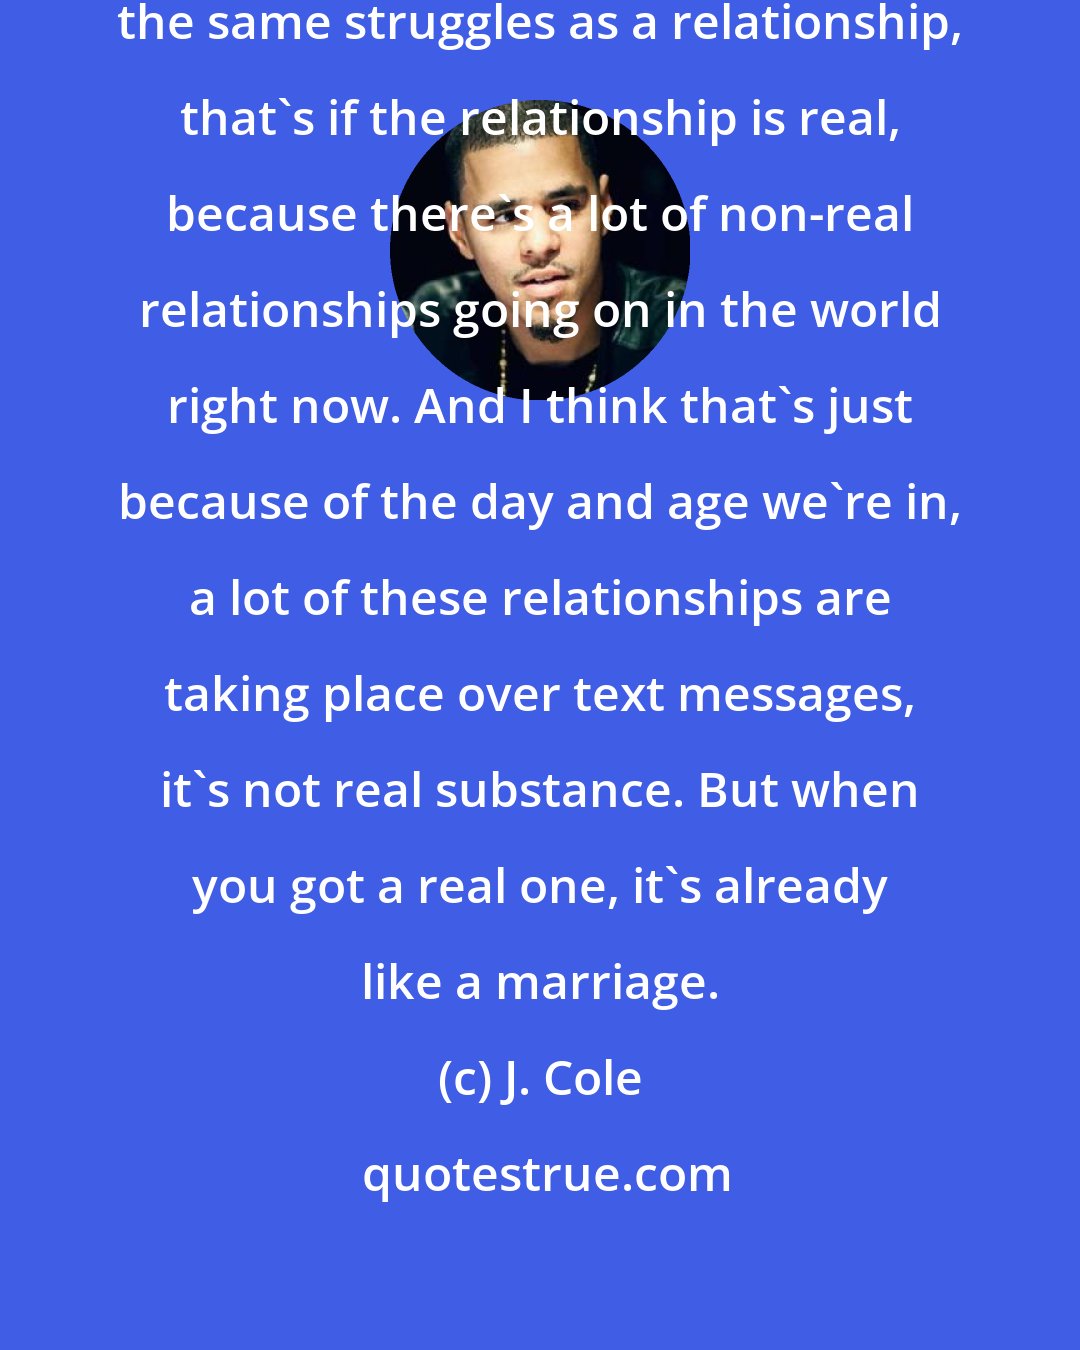 J. Cole: In marriage you got to go through the same struggles as a relationship, that's if the relationship is real, because there's a lot of non-real relationships going on in the world right now. And I think that's just because of the day and age we're in, a lot of these relationships are taking place over text messages, it's not real substance. But when you got a real one, it's already like a marriage.